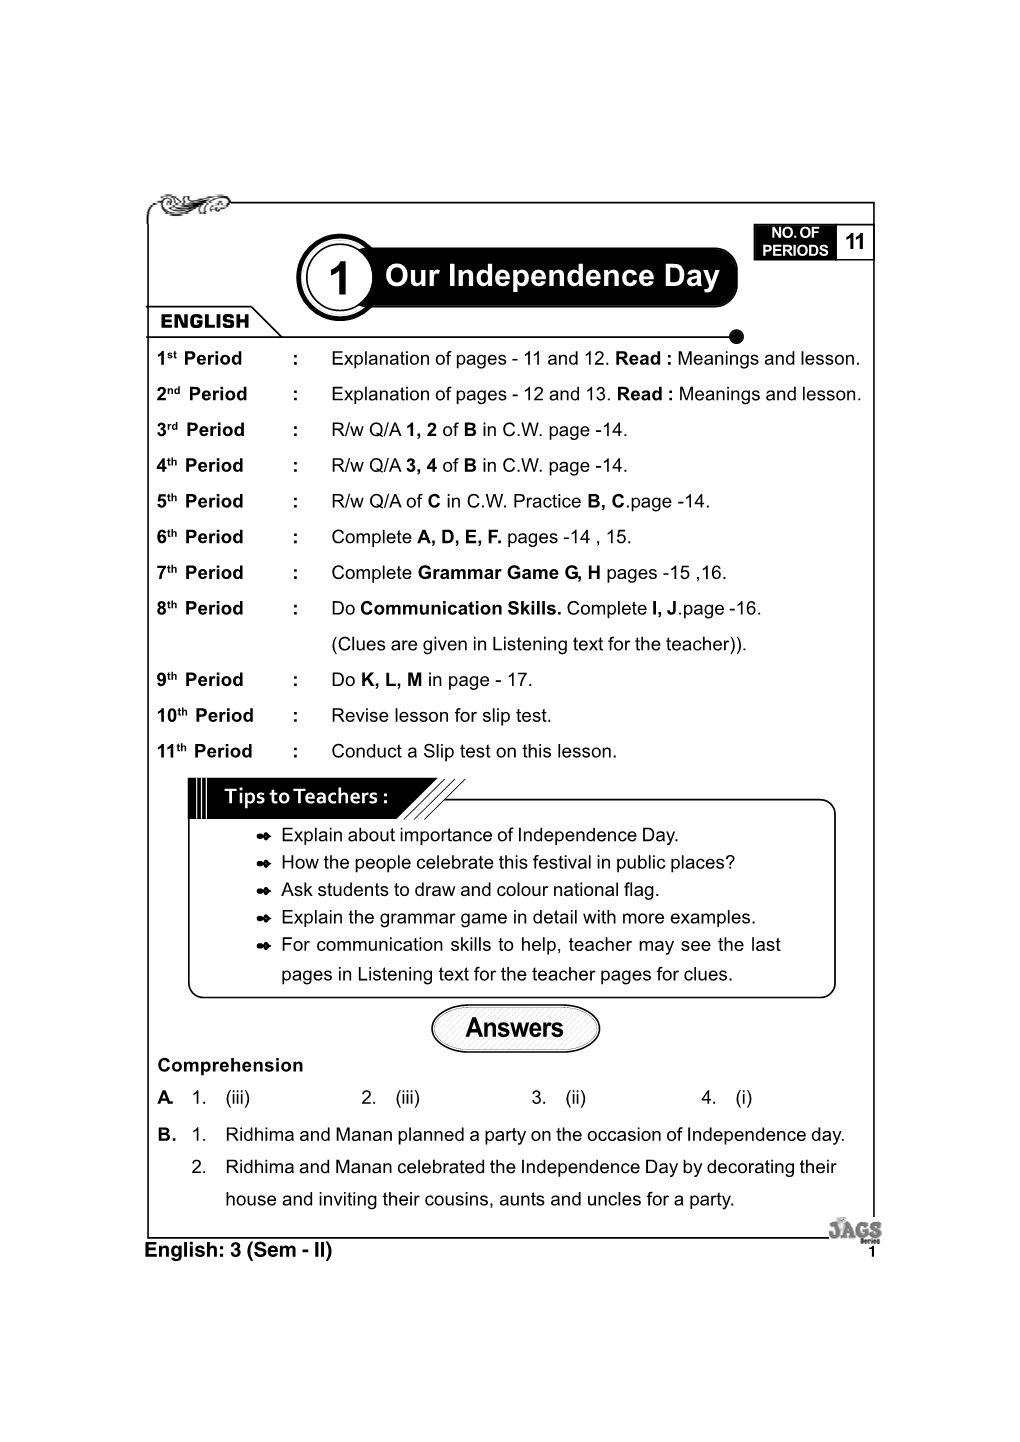 Our Independence Day ENGLISH 1 St Period : Explanation of Pages - 11 and 12